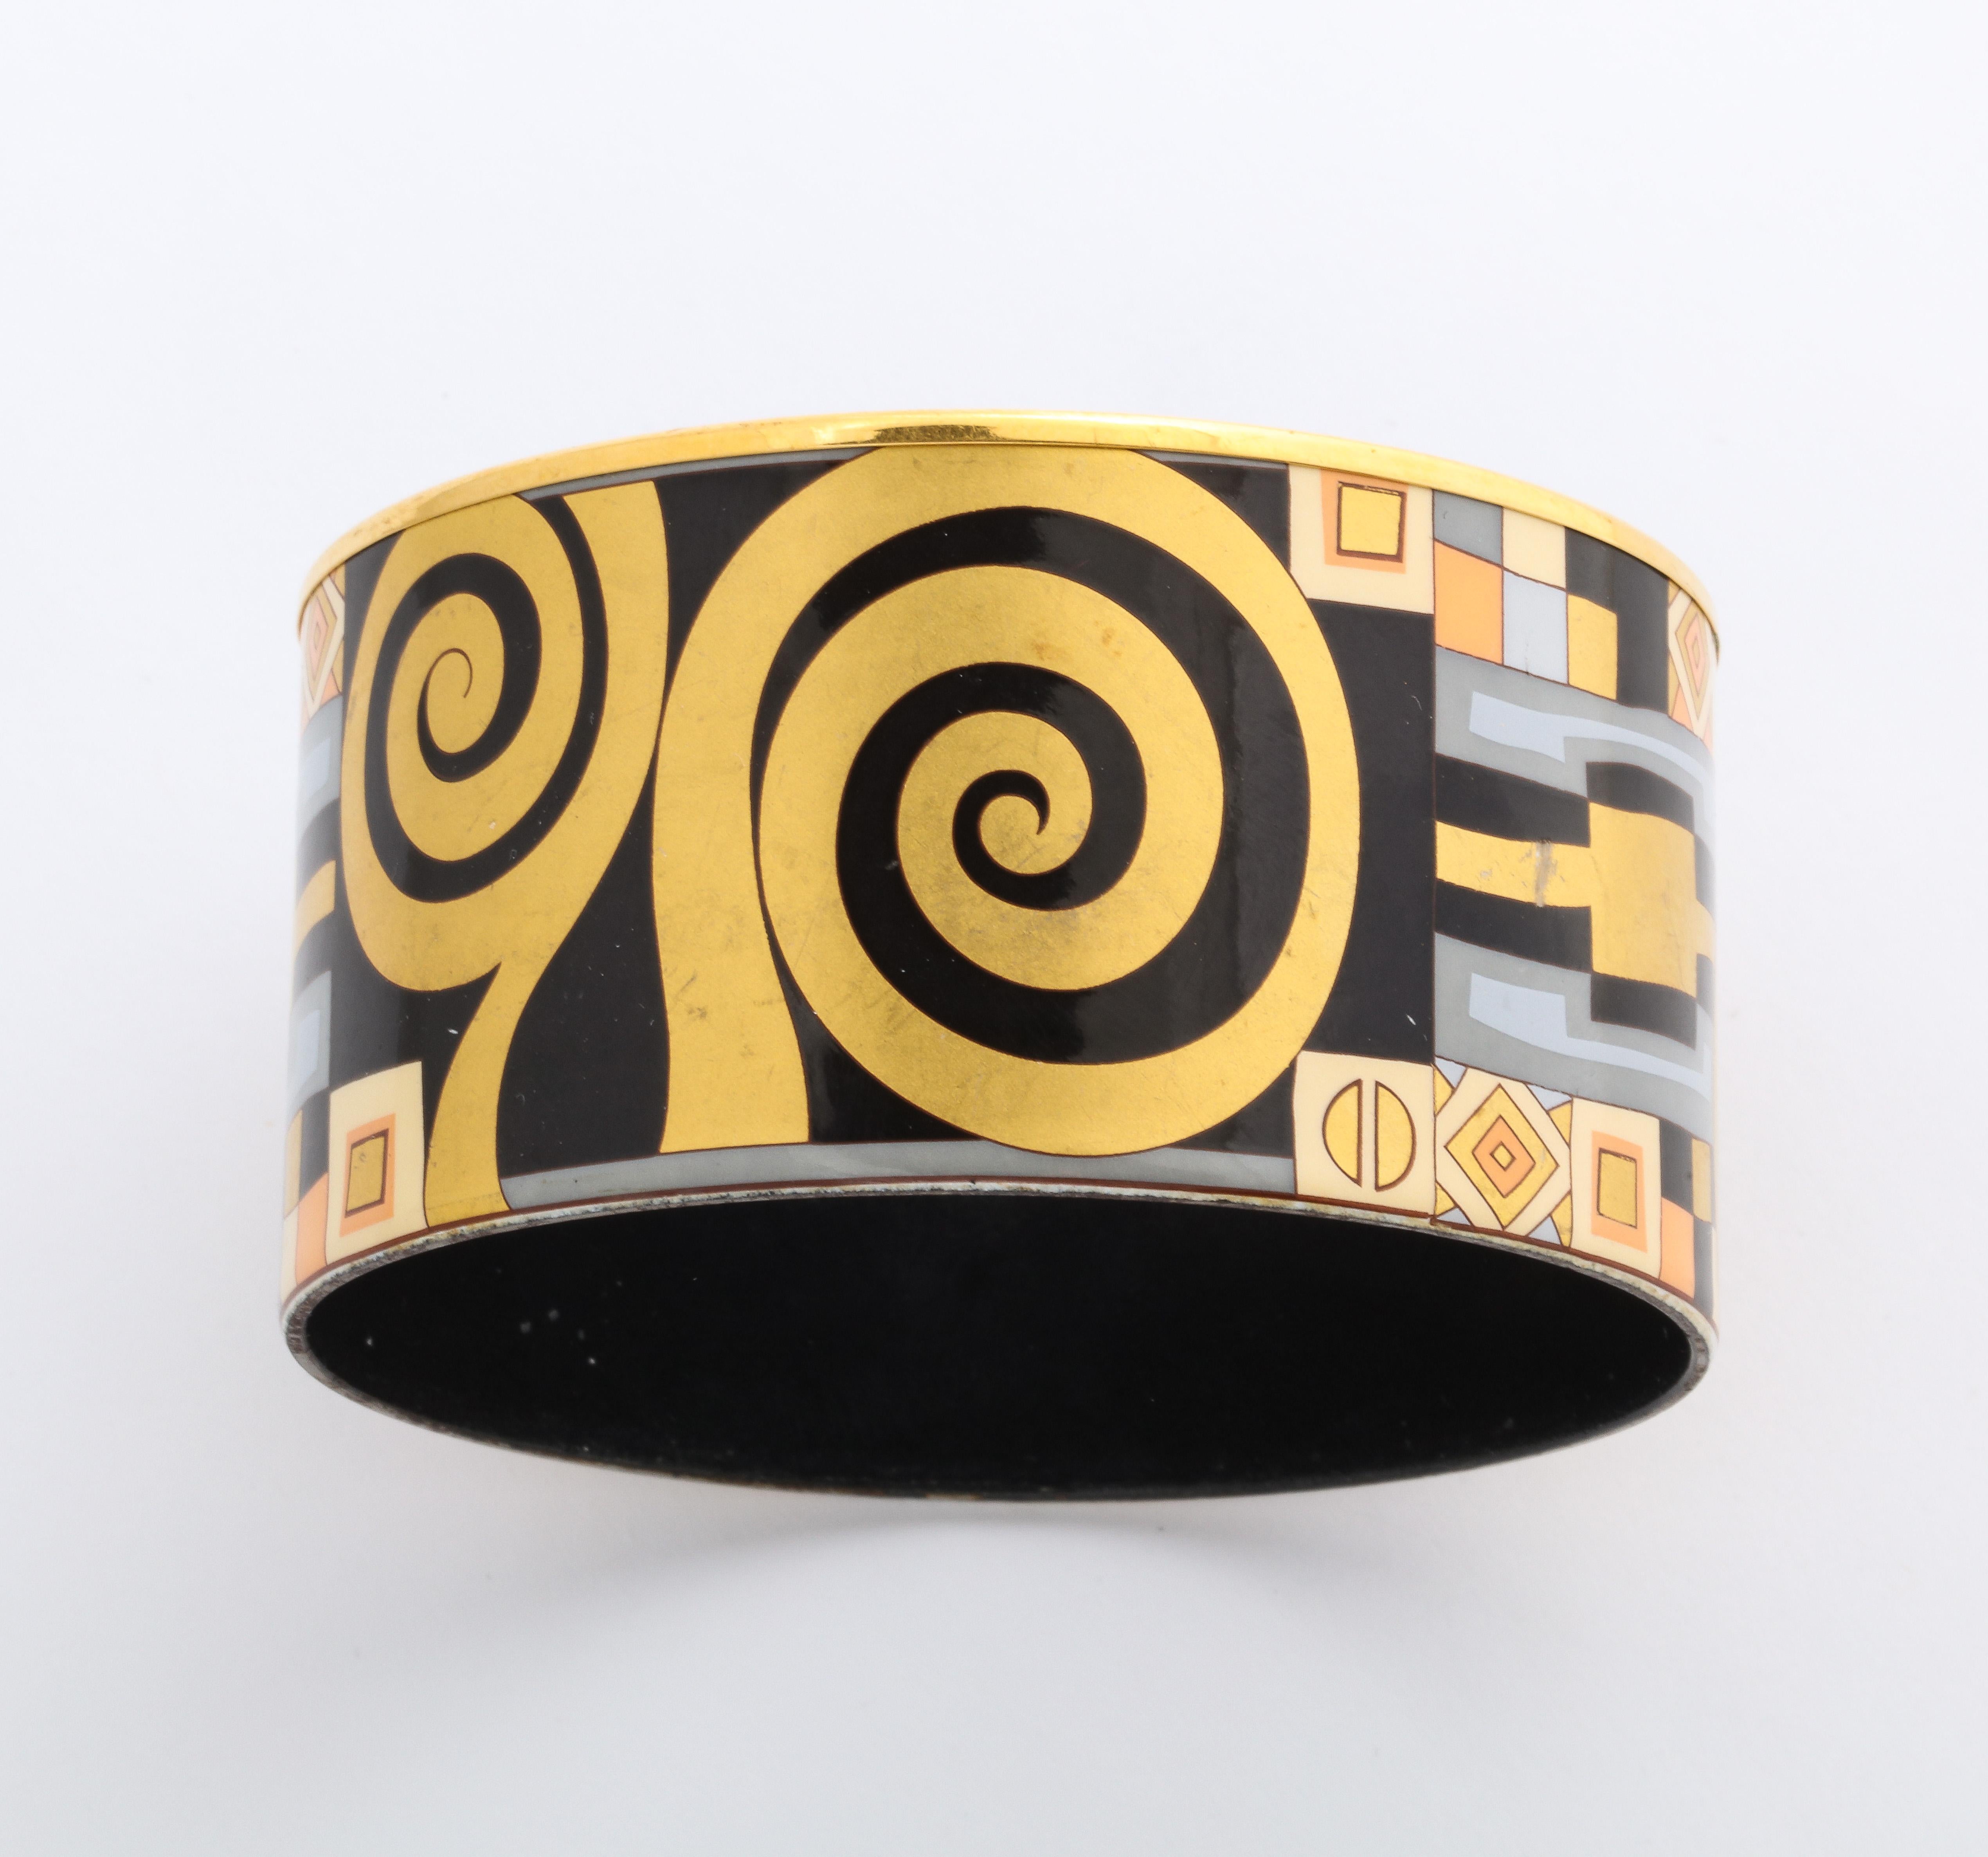 This beautiful Frey The jewelry is made in ViennaWille enamel bangle is from an earlier collection and has an unusual design on black enamel .   FreyWille jewelry is quality Austrian enamel with 18K overlay on metal. The jewelry is made in Vienna